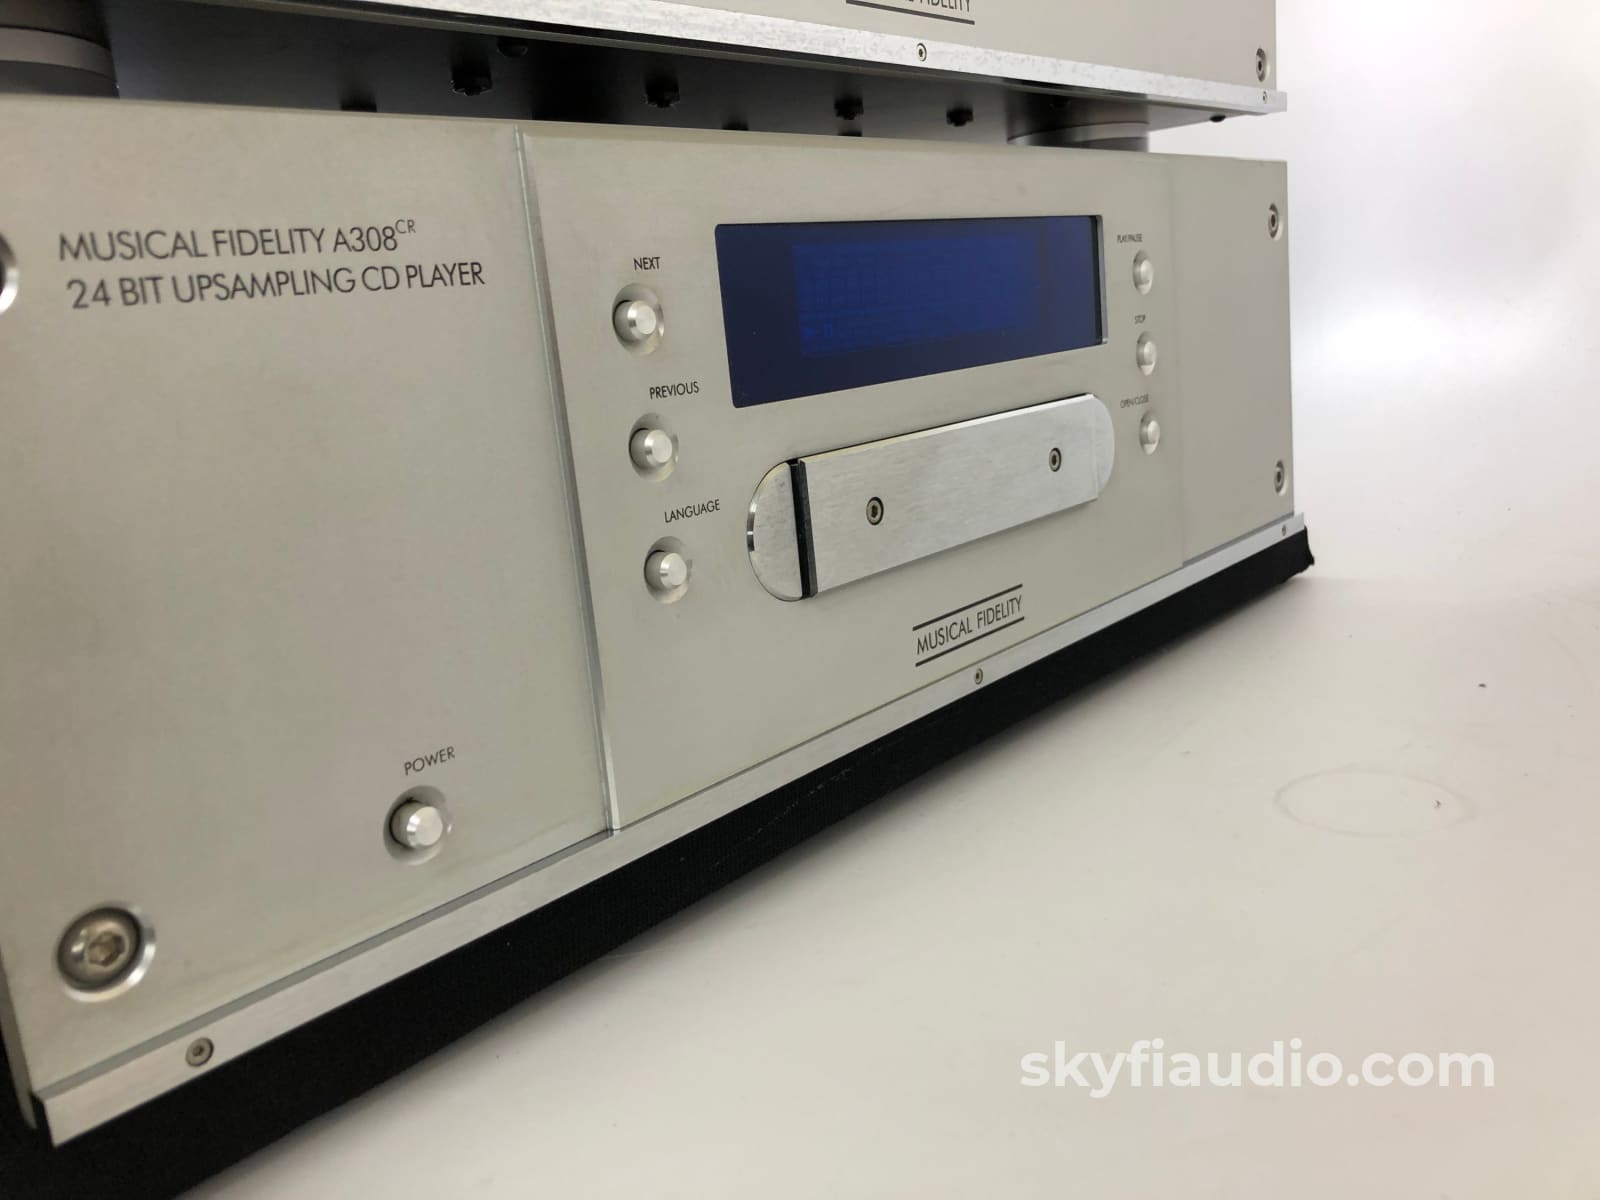 Musical Fidelity A308Cr Upsampling 24-Bit Cd Player With Mods By The Upgrade Company + Digital